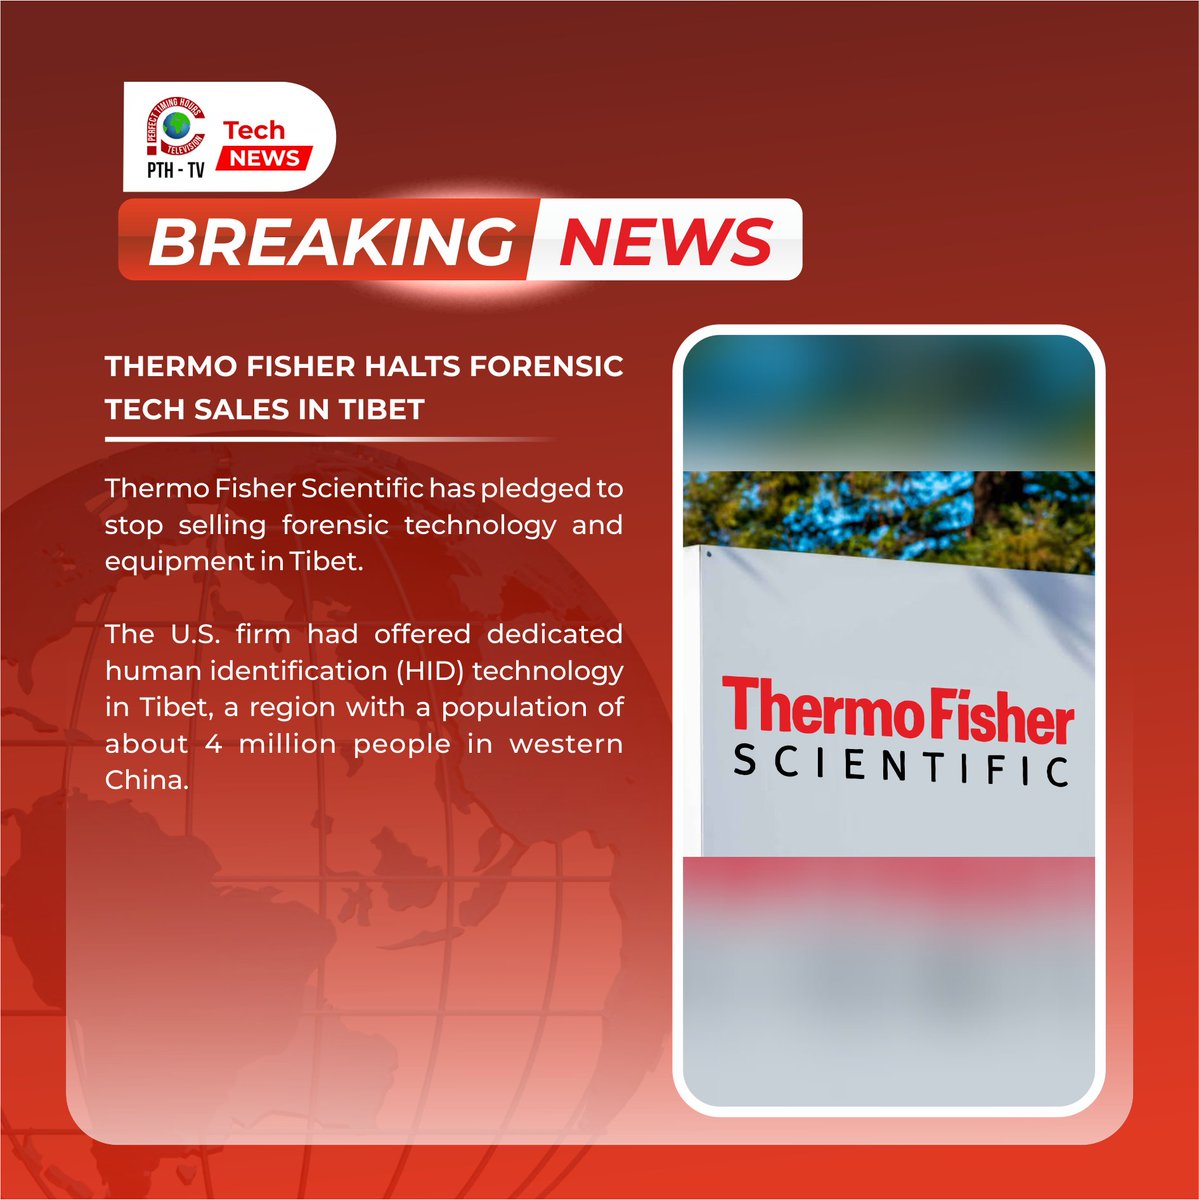 Thermo Fisher halts forensic tech sales in Tibet

Read the full story at www.re uters.com/technology/the… 

#ThermoFisher #ForensicTech #TechNews #Tibet #CorporateEthics #TechSales #PerfectTimingTechnologies #PerfectTimingHolding #EthicalTech #BusinessDecisions